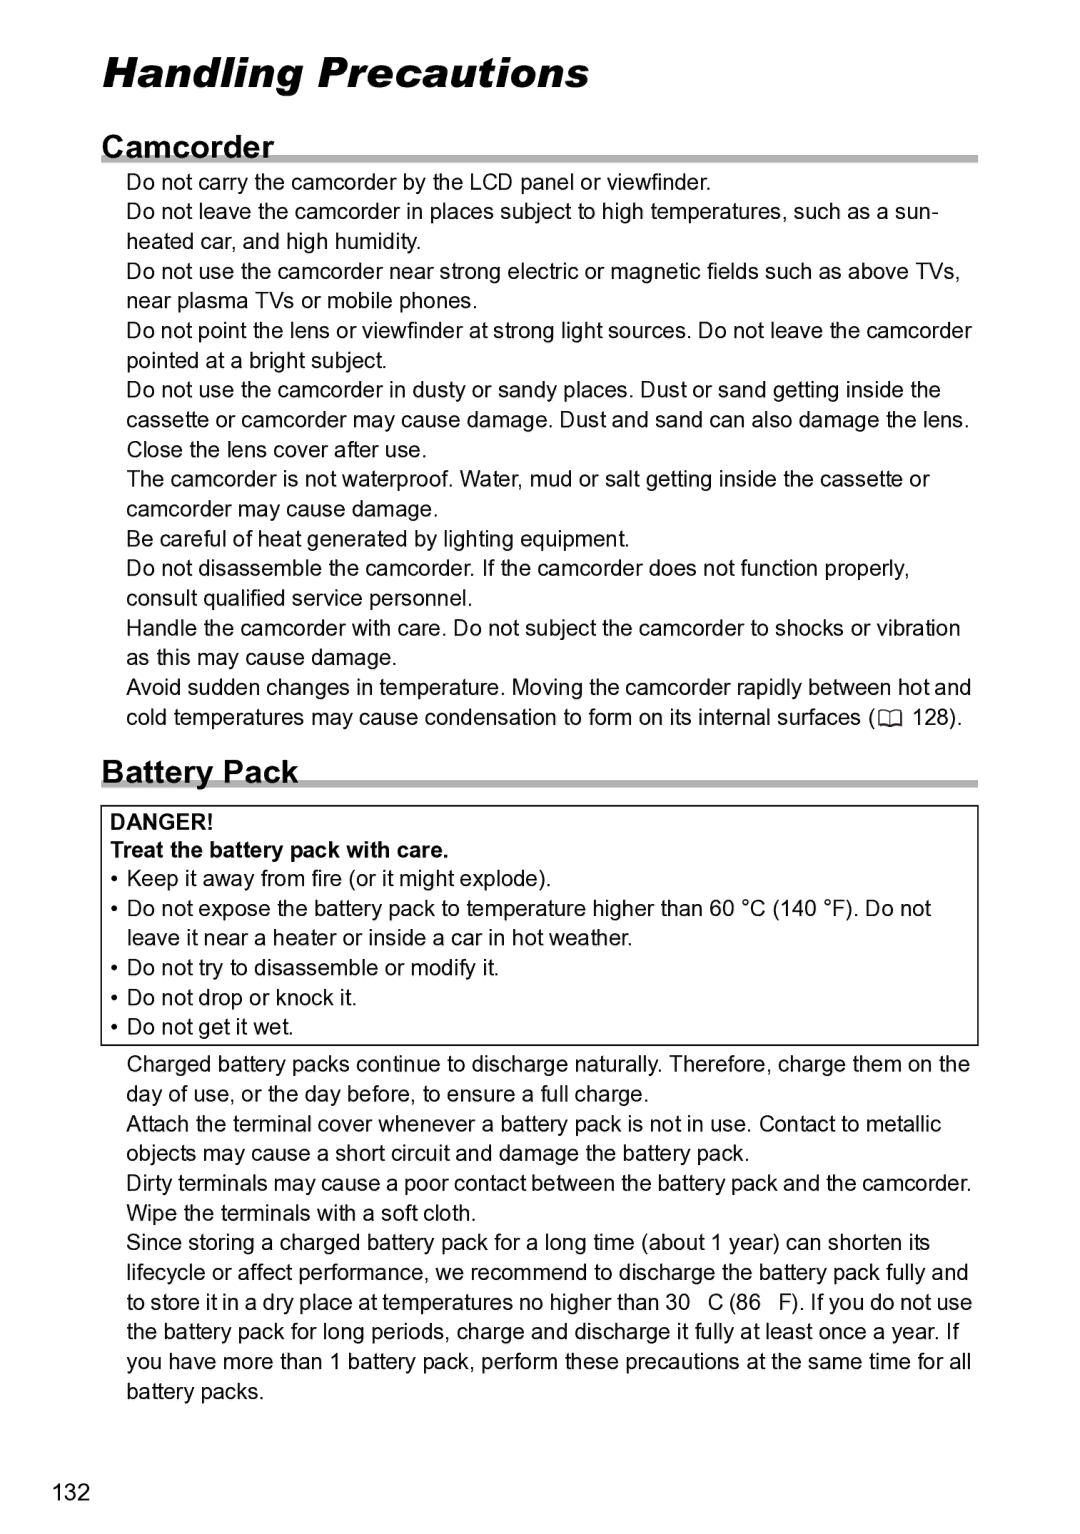 Canon S1 instruction manual HandlingDo’s & Don’tsPrecautions, Camcorder, Battery Pack, Treat the battery pack with care 